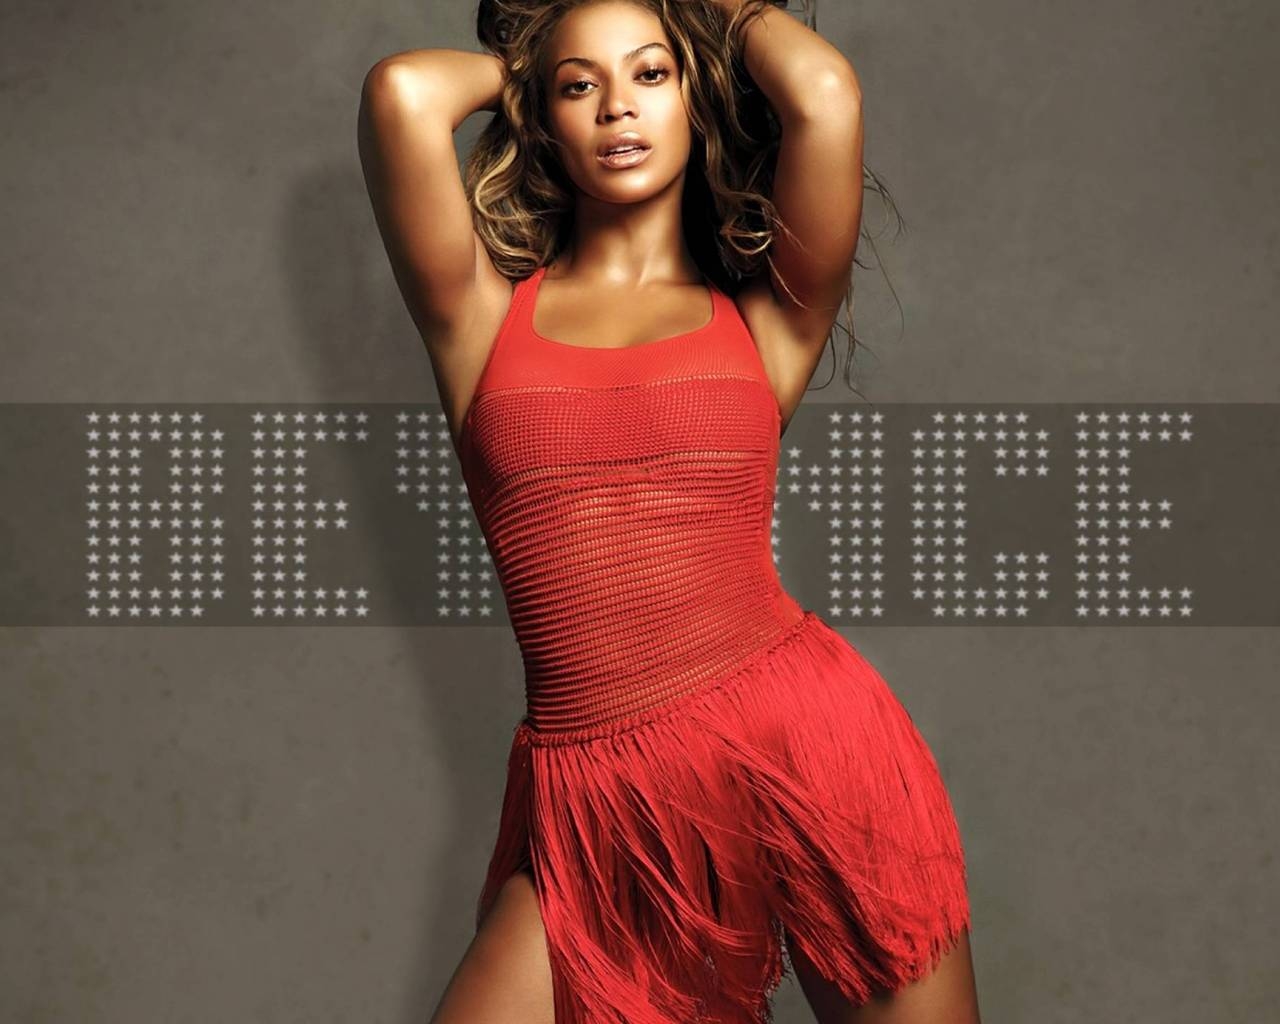 Beautiful Beyonce for 1280 x 1024 resolution